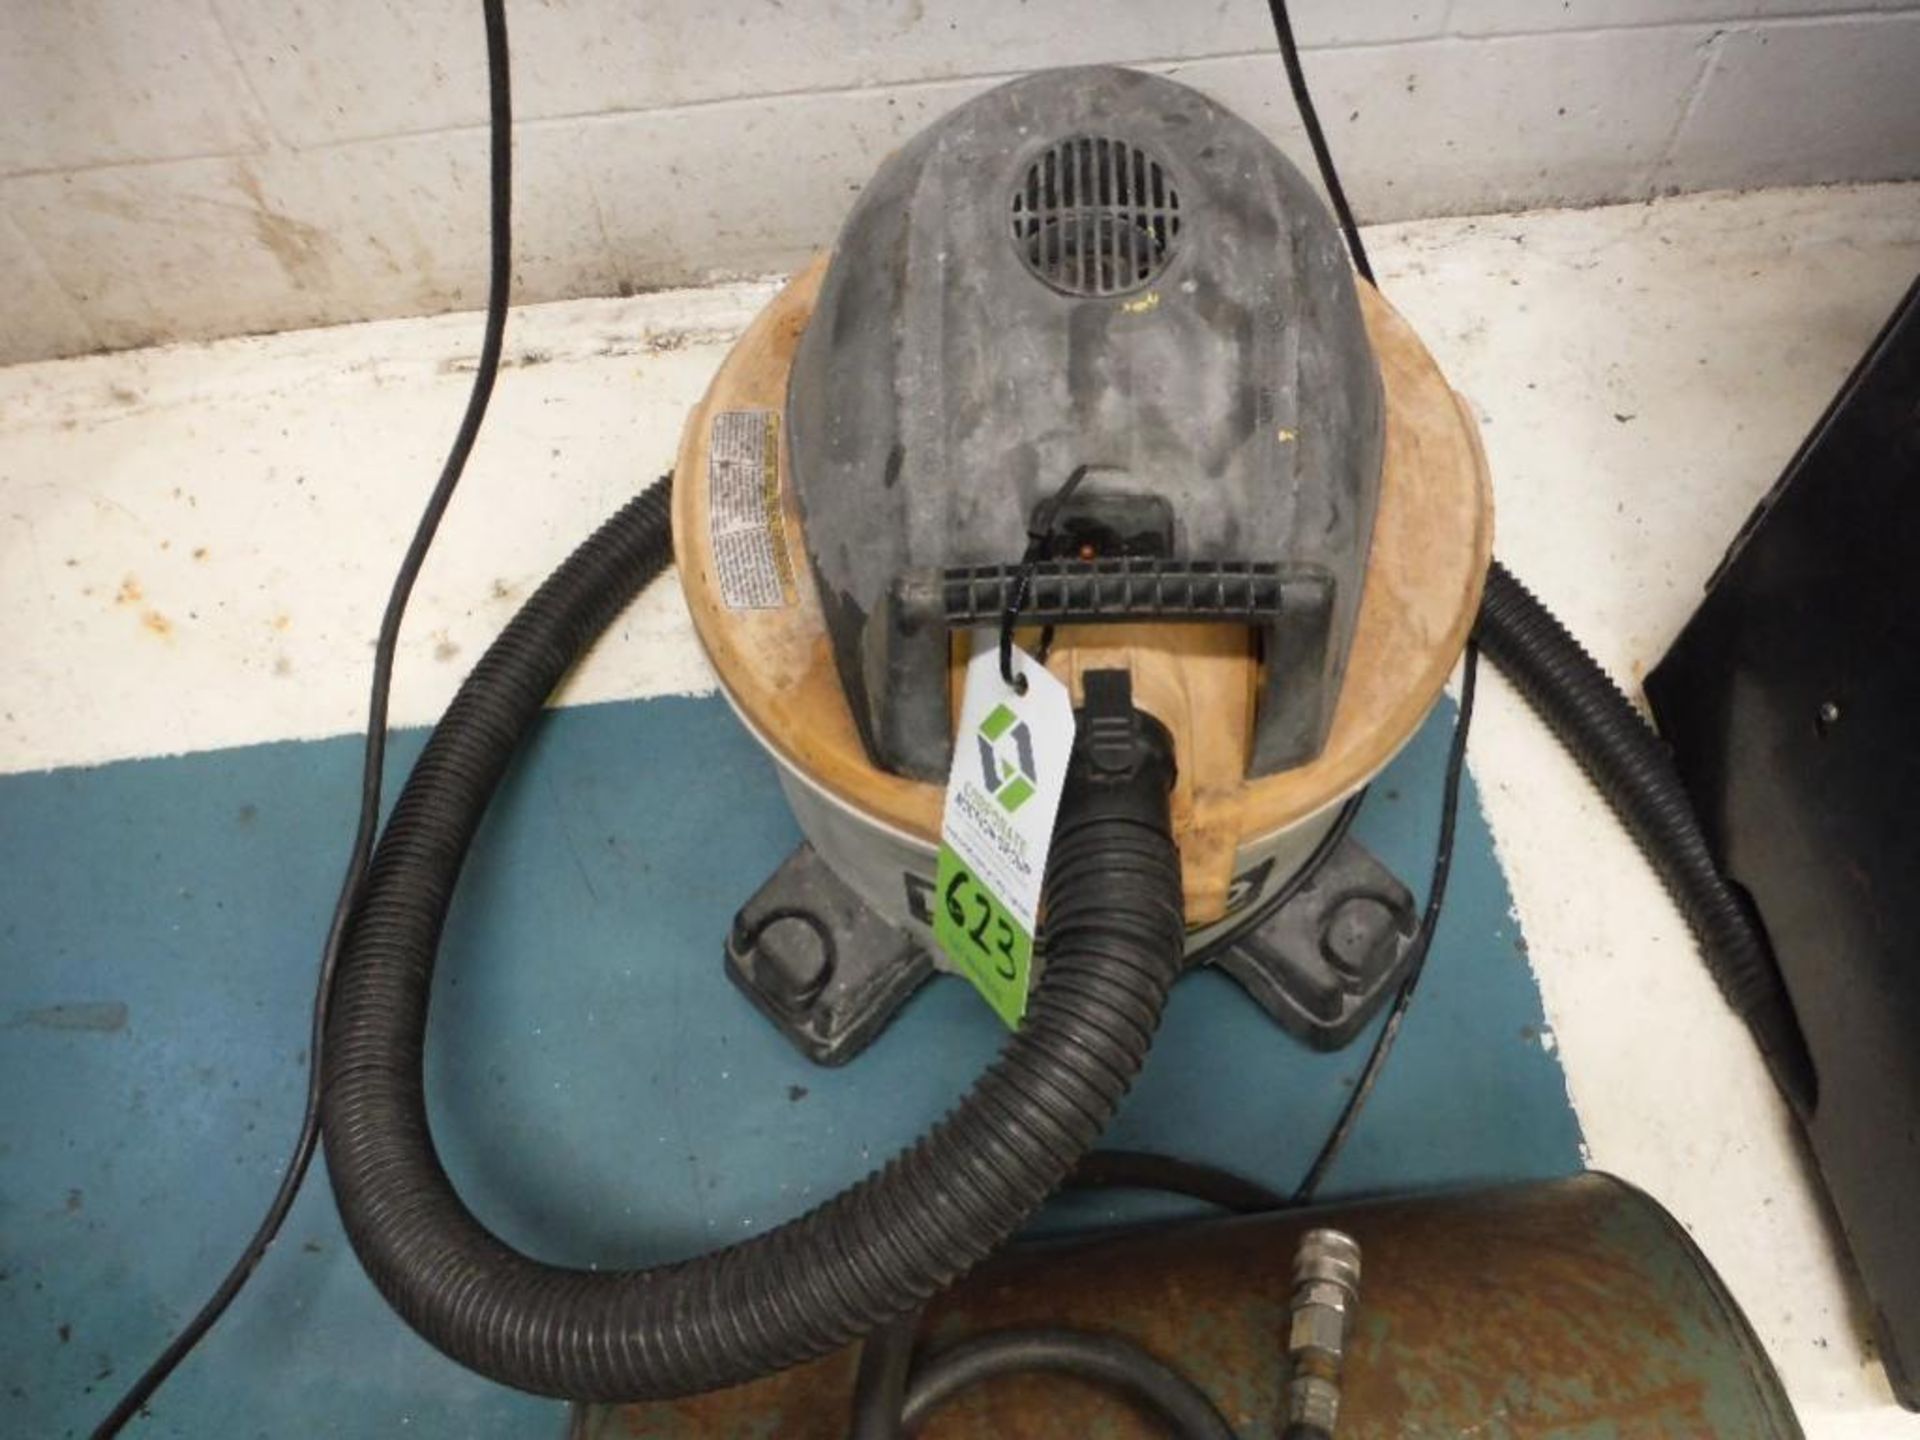 Rigid shop vac and speedaire portable air tank (lot). - RIGGING FEE FOR DOMESTIC TRANSPORT $25 - Image 3 of 3